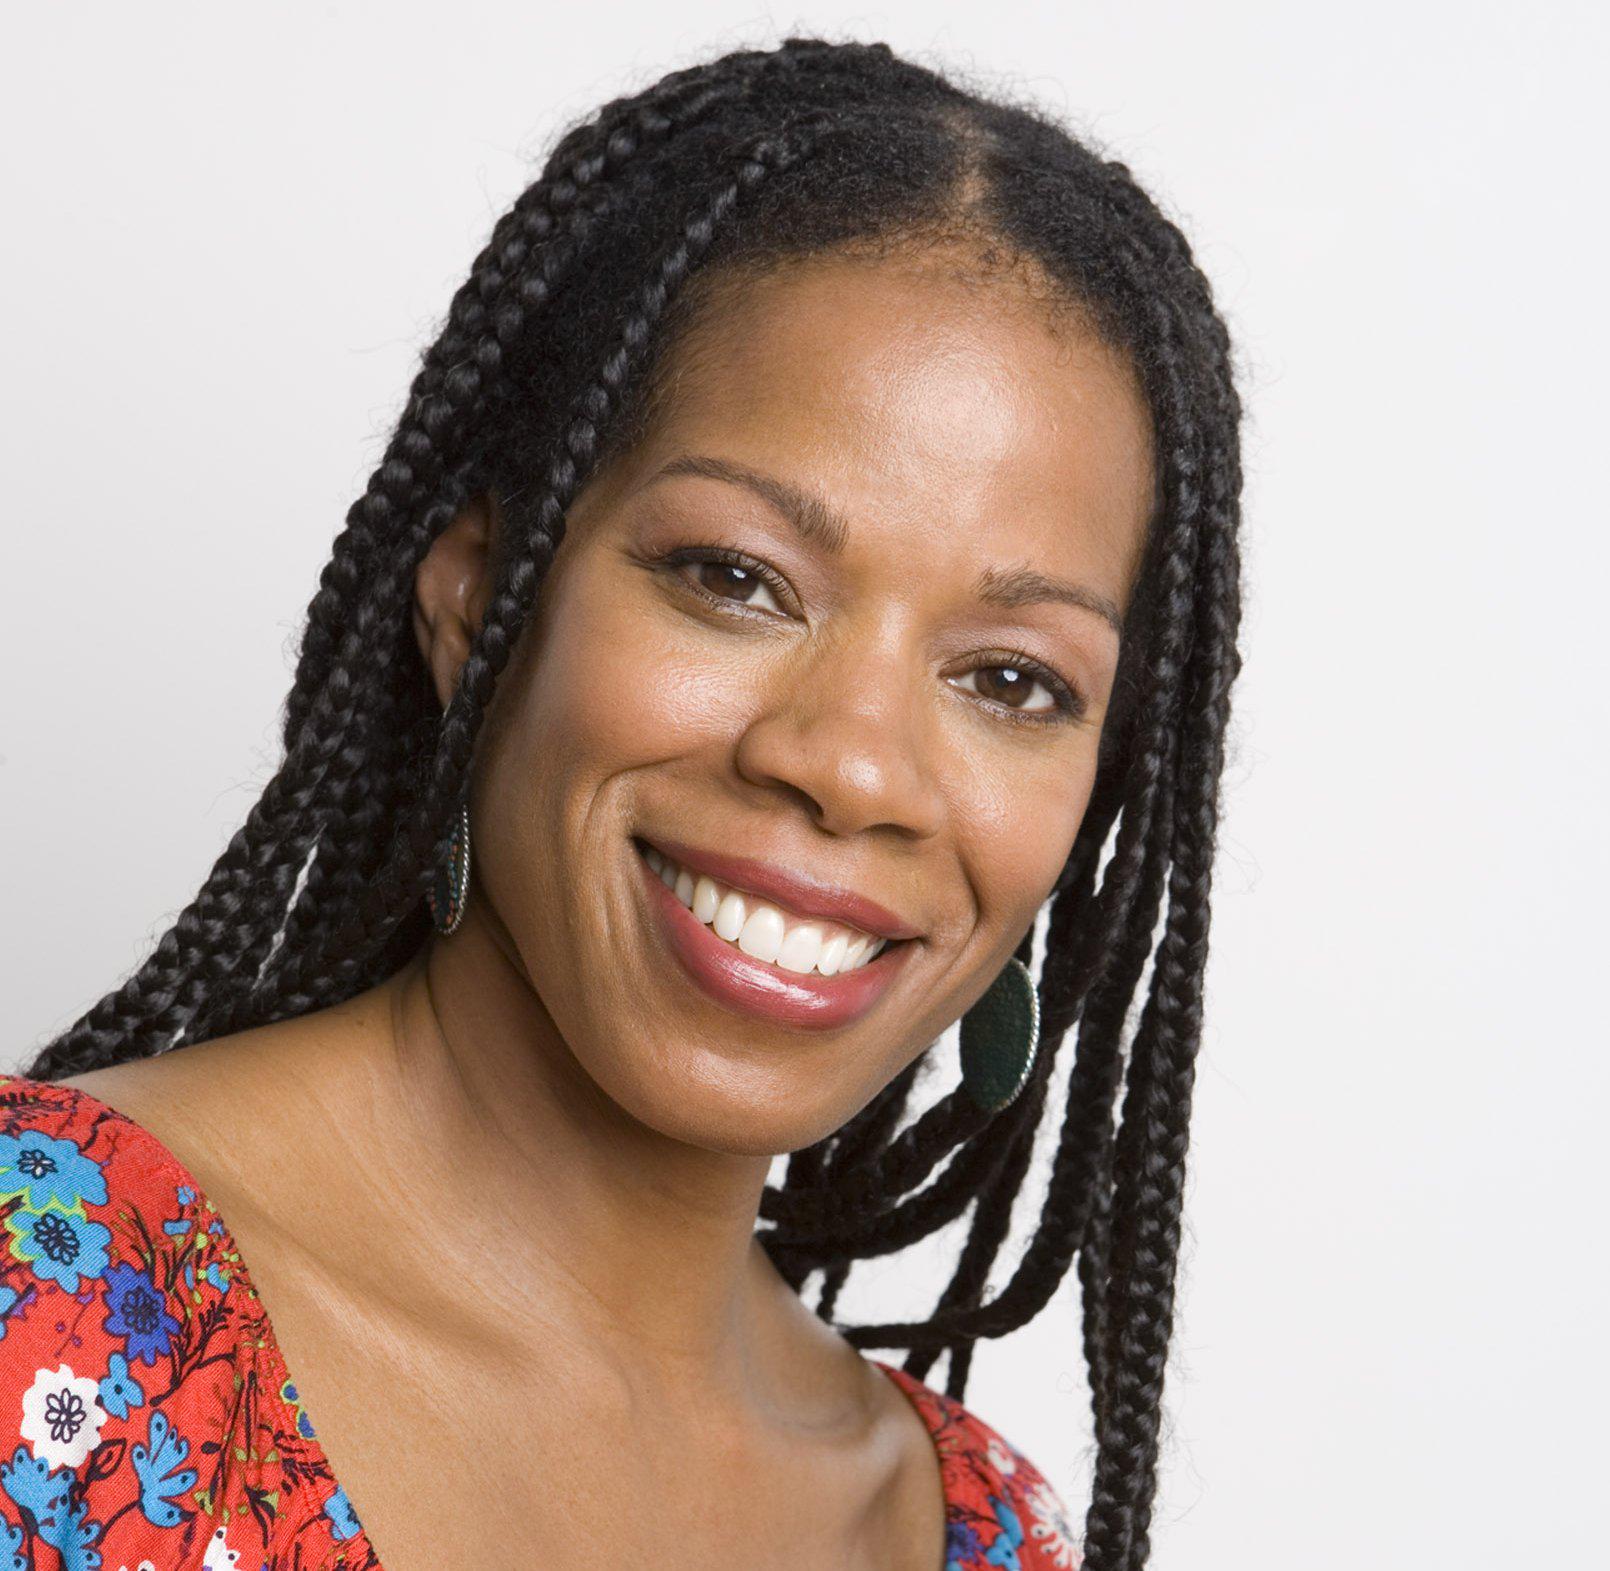 Happy birthday to actress comedian Kim Wayans who turns 54 years old today 